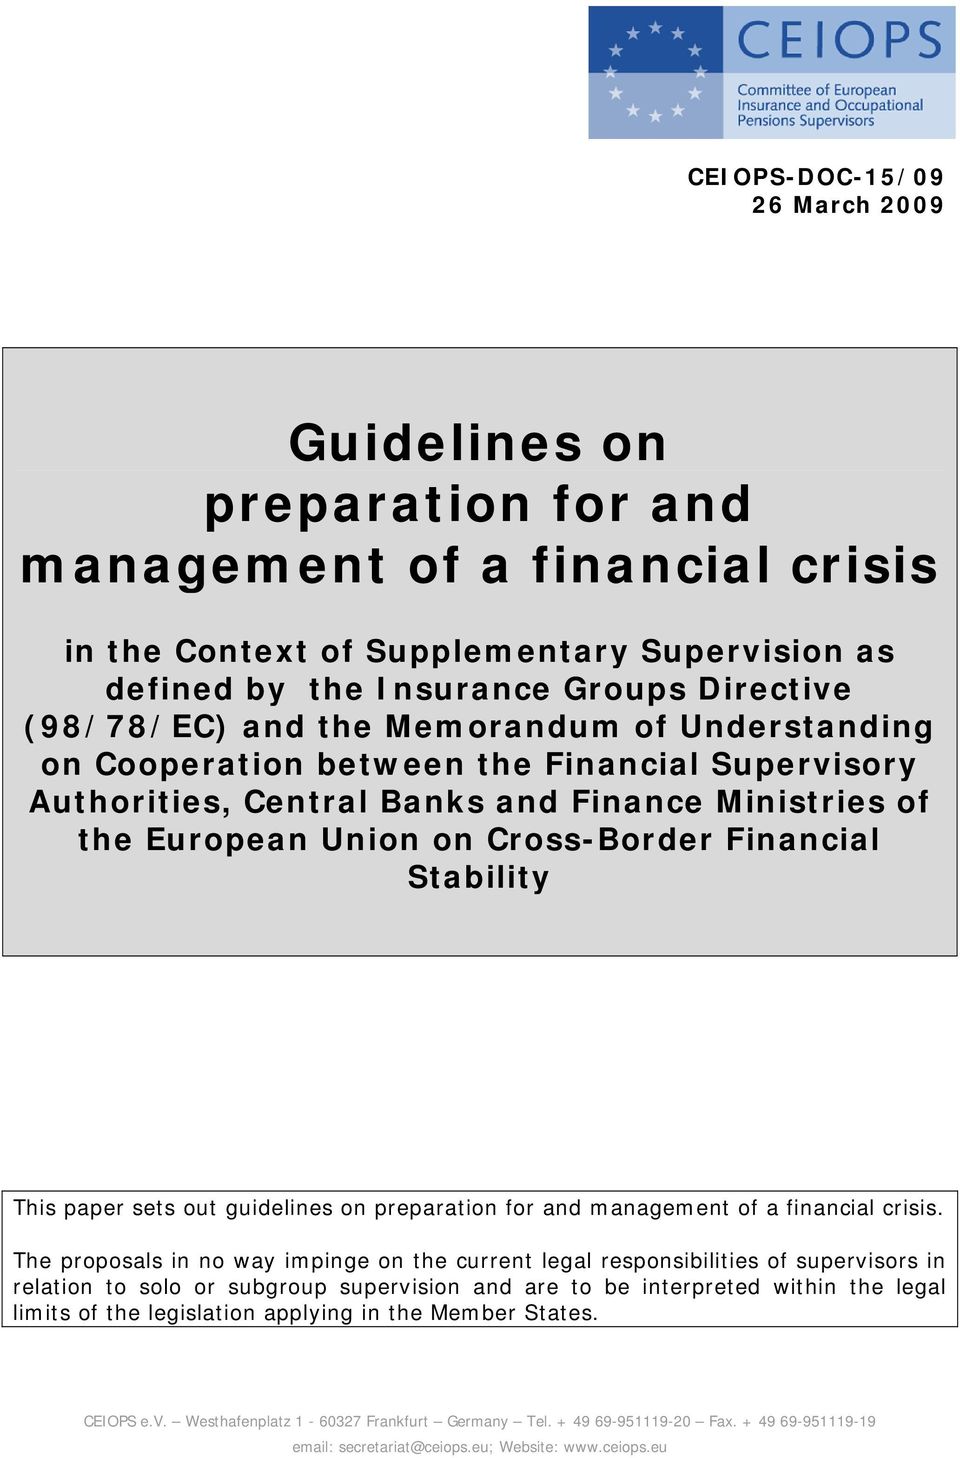 paper sets out guidelines on preparation for and management of a financial crisis.